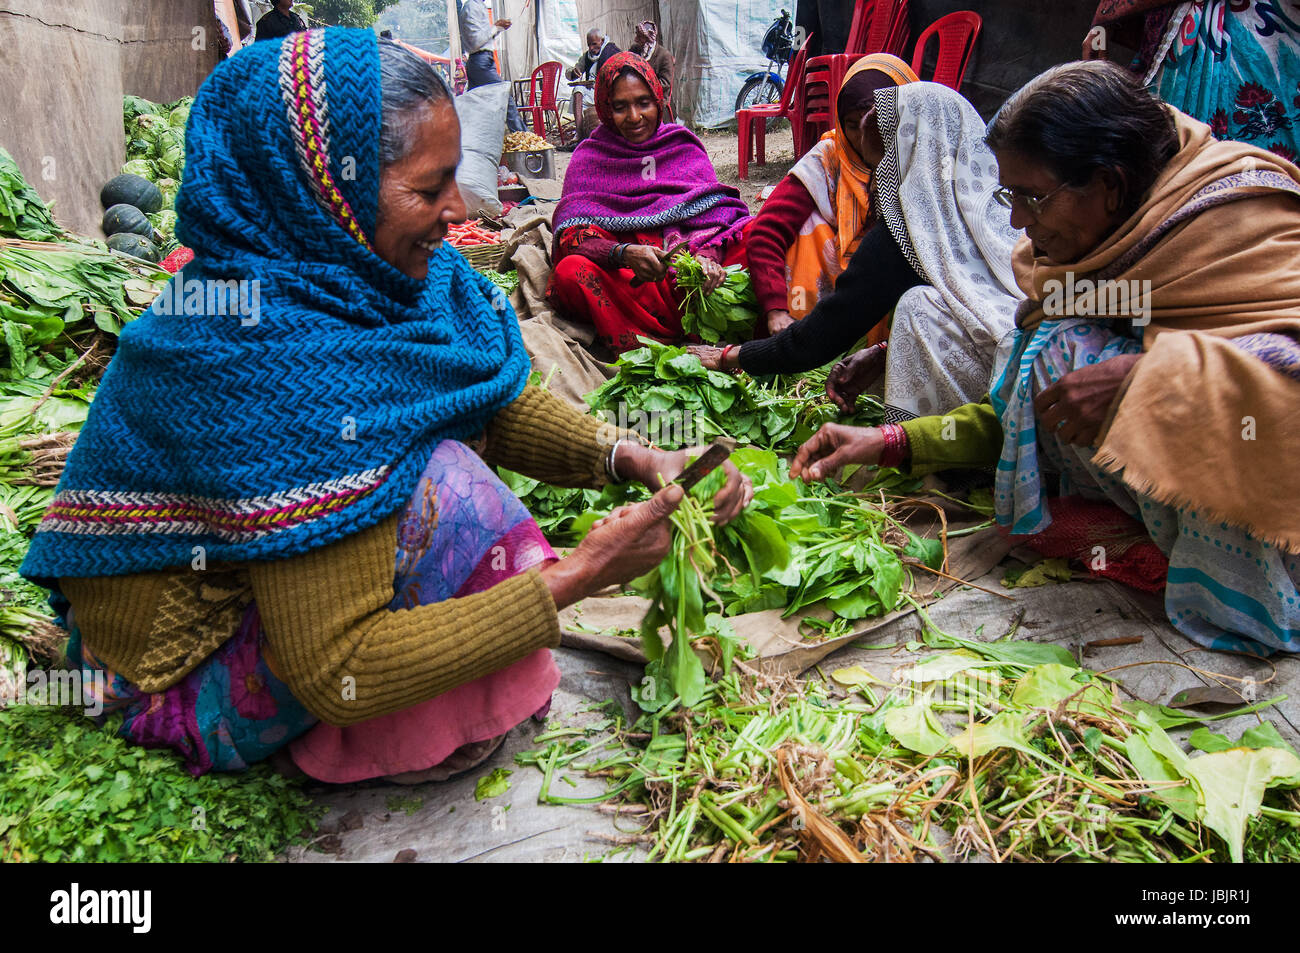 KOLKATA , INDIA - JANUARY 12, 2014 : Rural Indian women cutting vegetables at Babughat transit camp. Every year devotees from all over India visits Gangasagar for Holy bathing and stays at Babughat in transit. Stock Photo